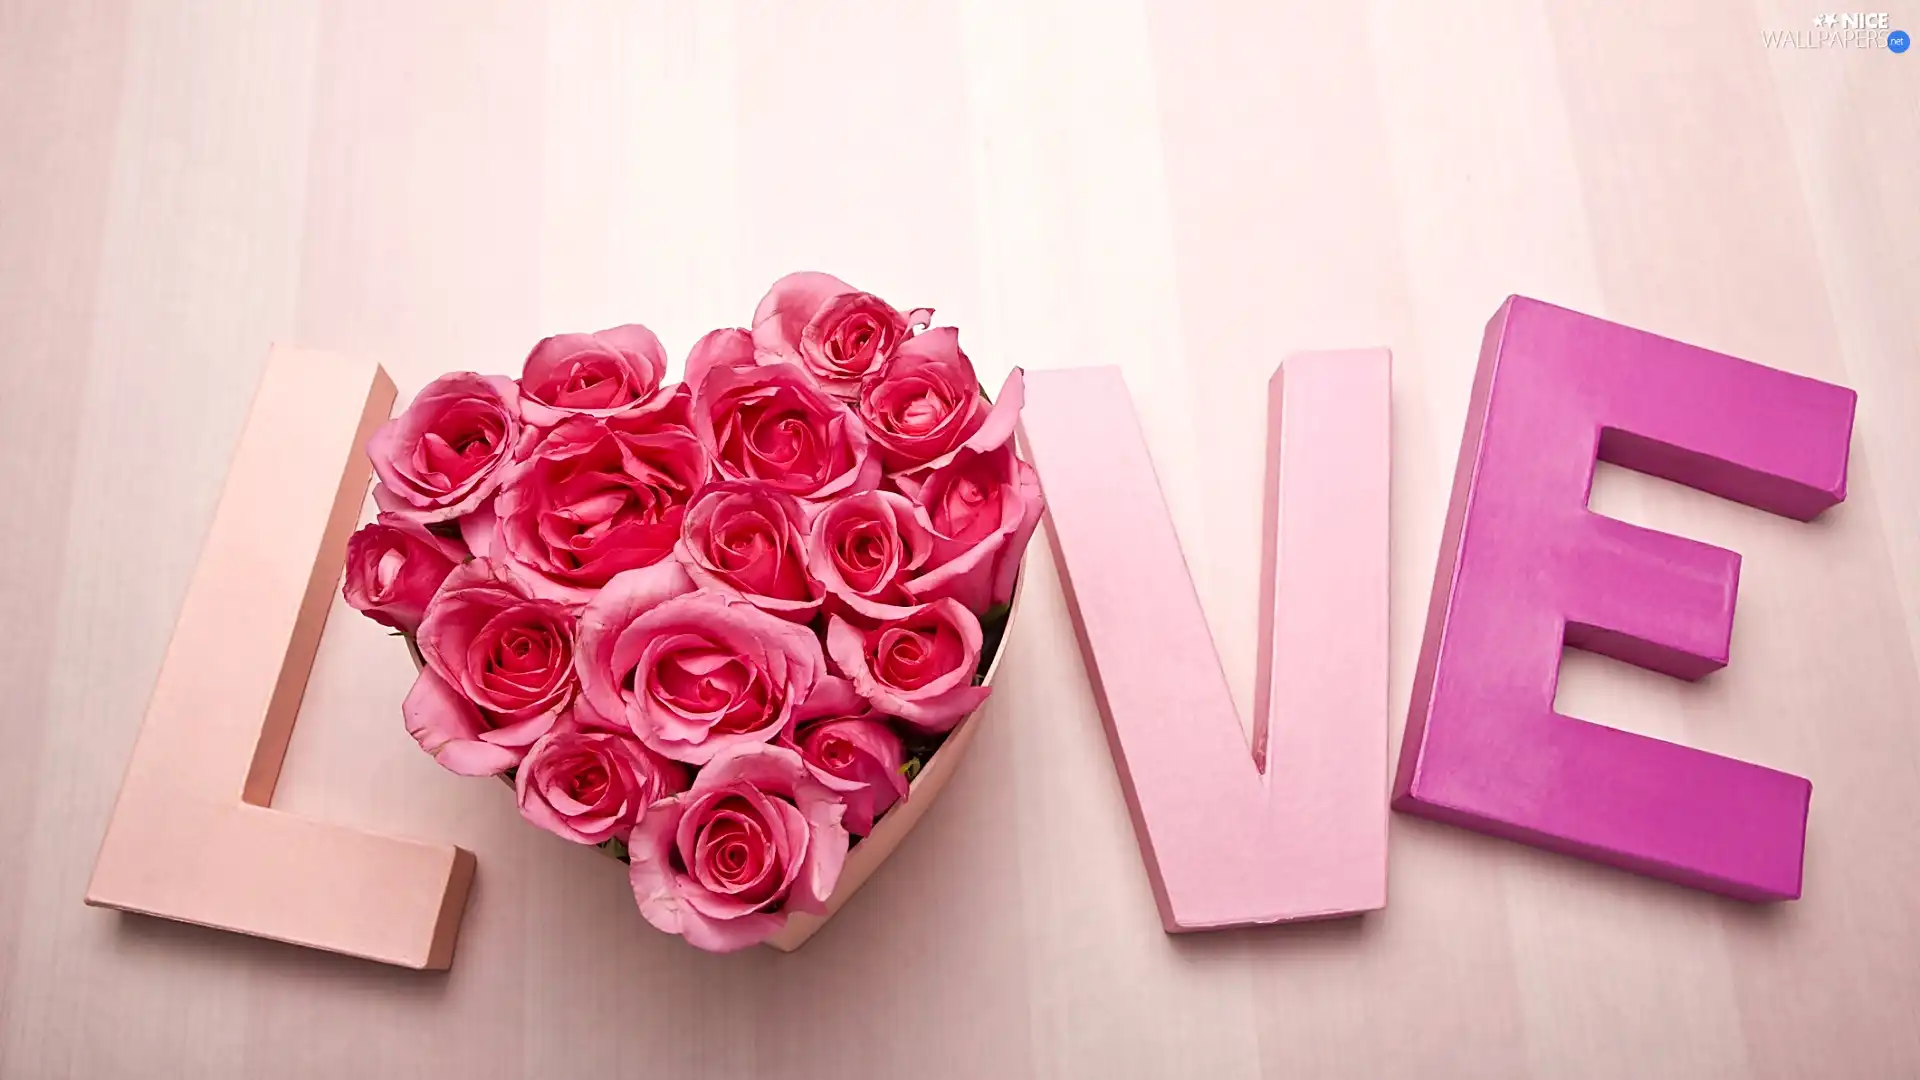 Box, LOVE, roses, Heart, text, Pink, boarding